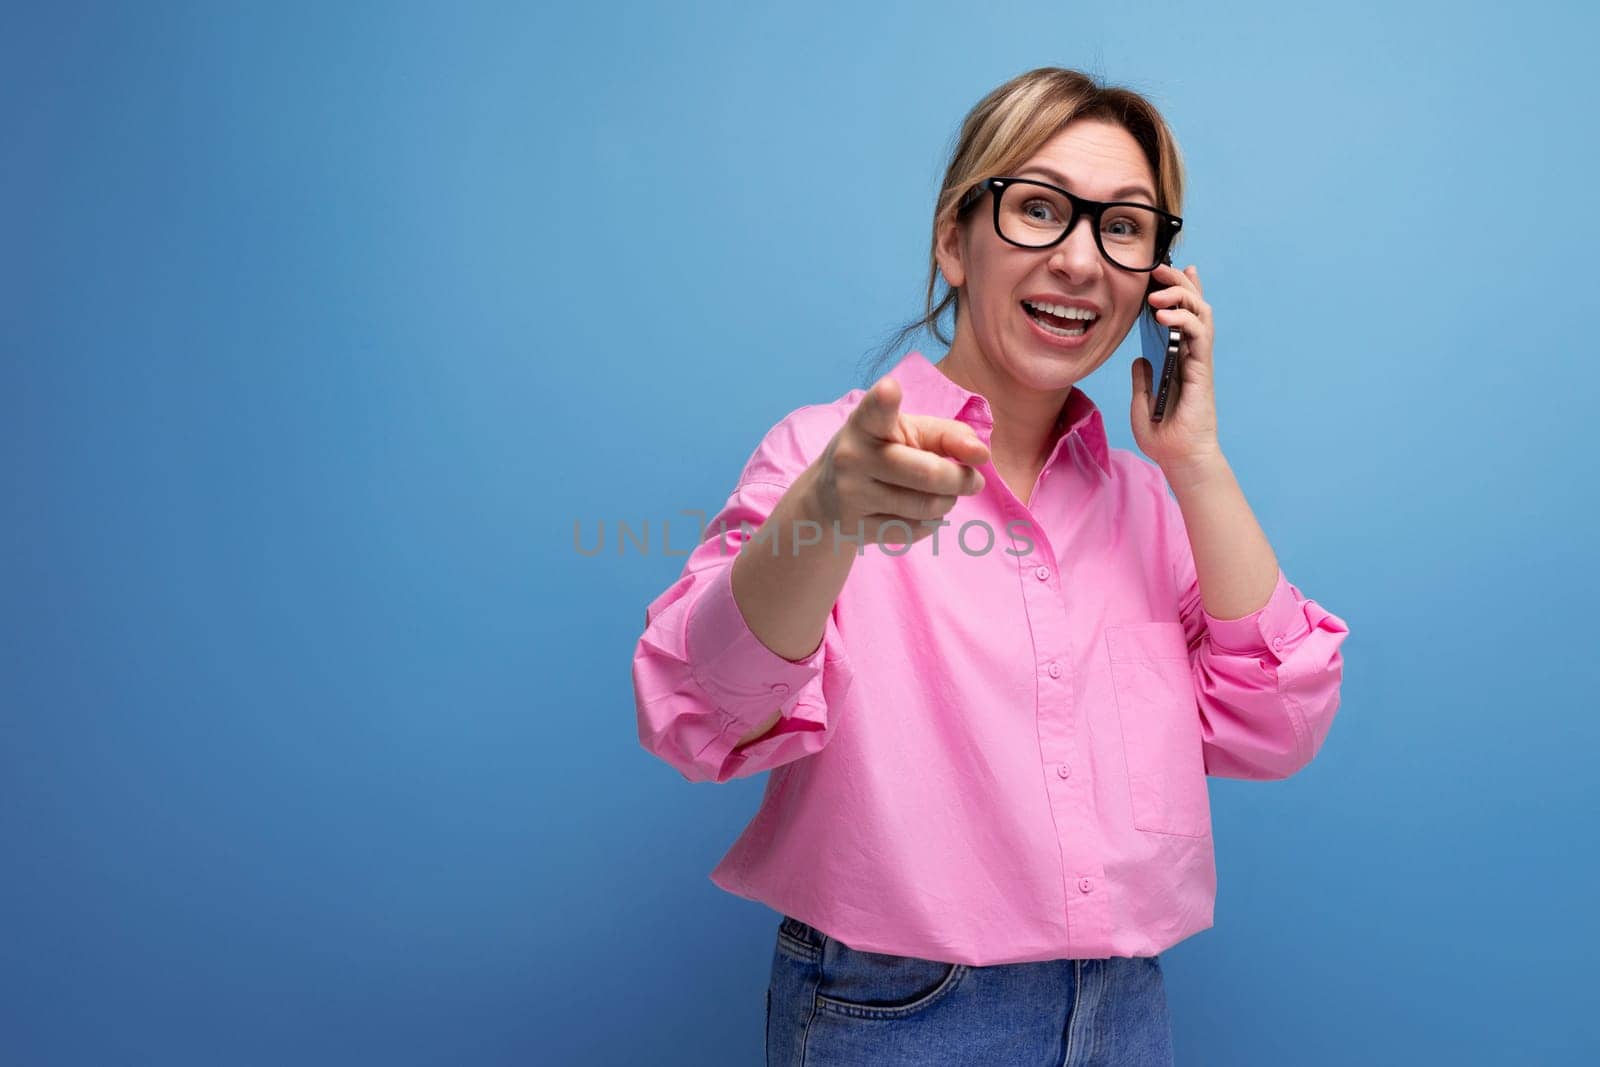 young surprised caucasian blonde secretary woman with ponytail hairstyle, glasses and pink shirt chatting on the phone by TRMK